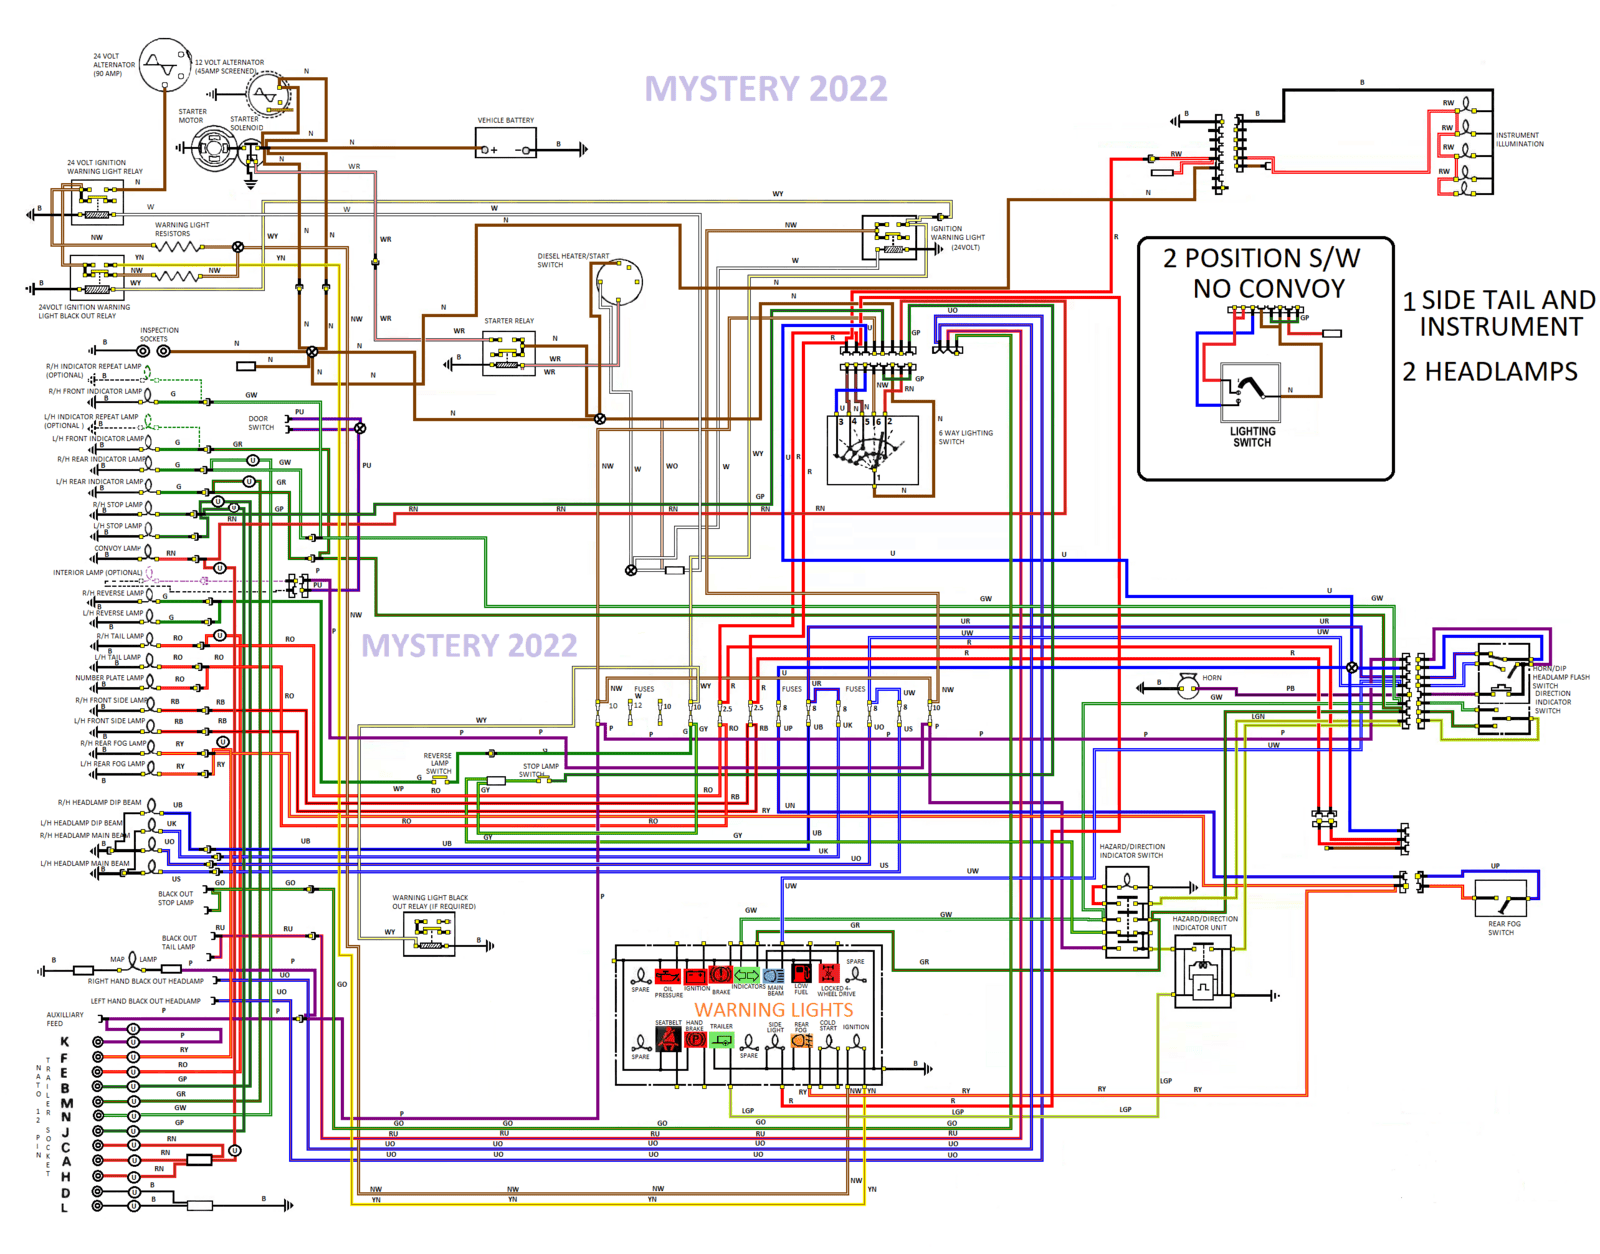 Wiring diagram for military Defender 110 main light switch | LandyZone ...